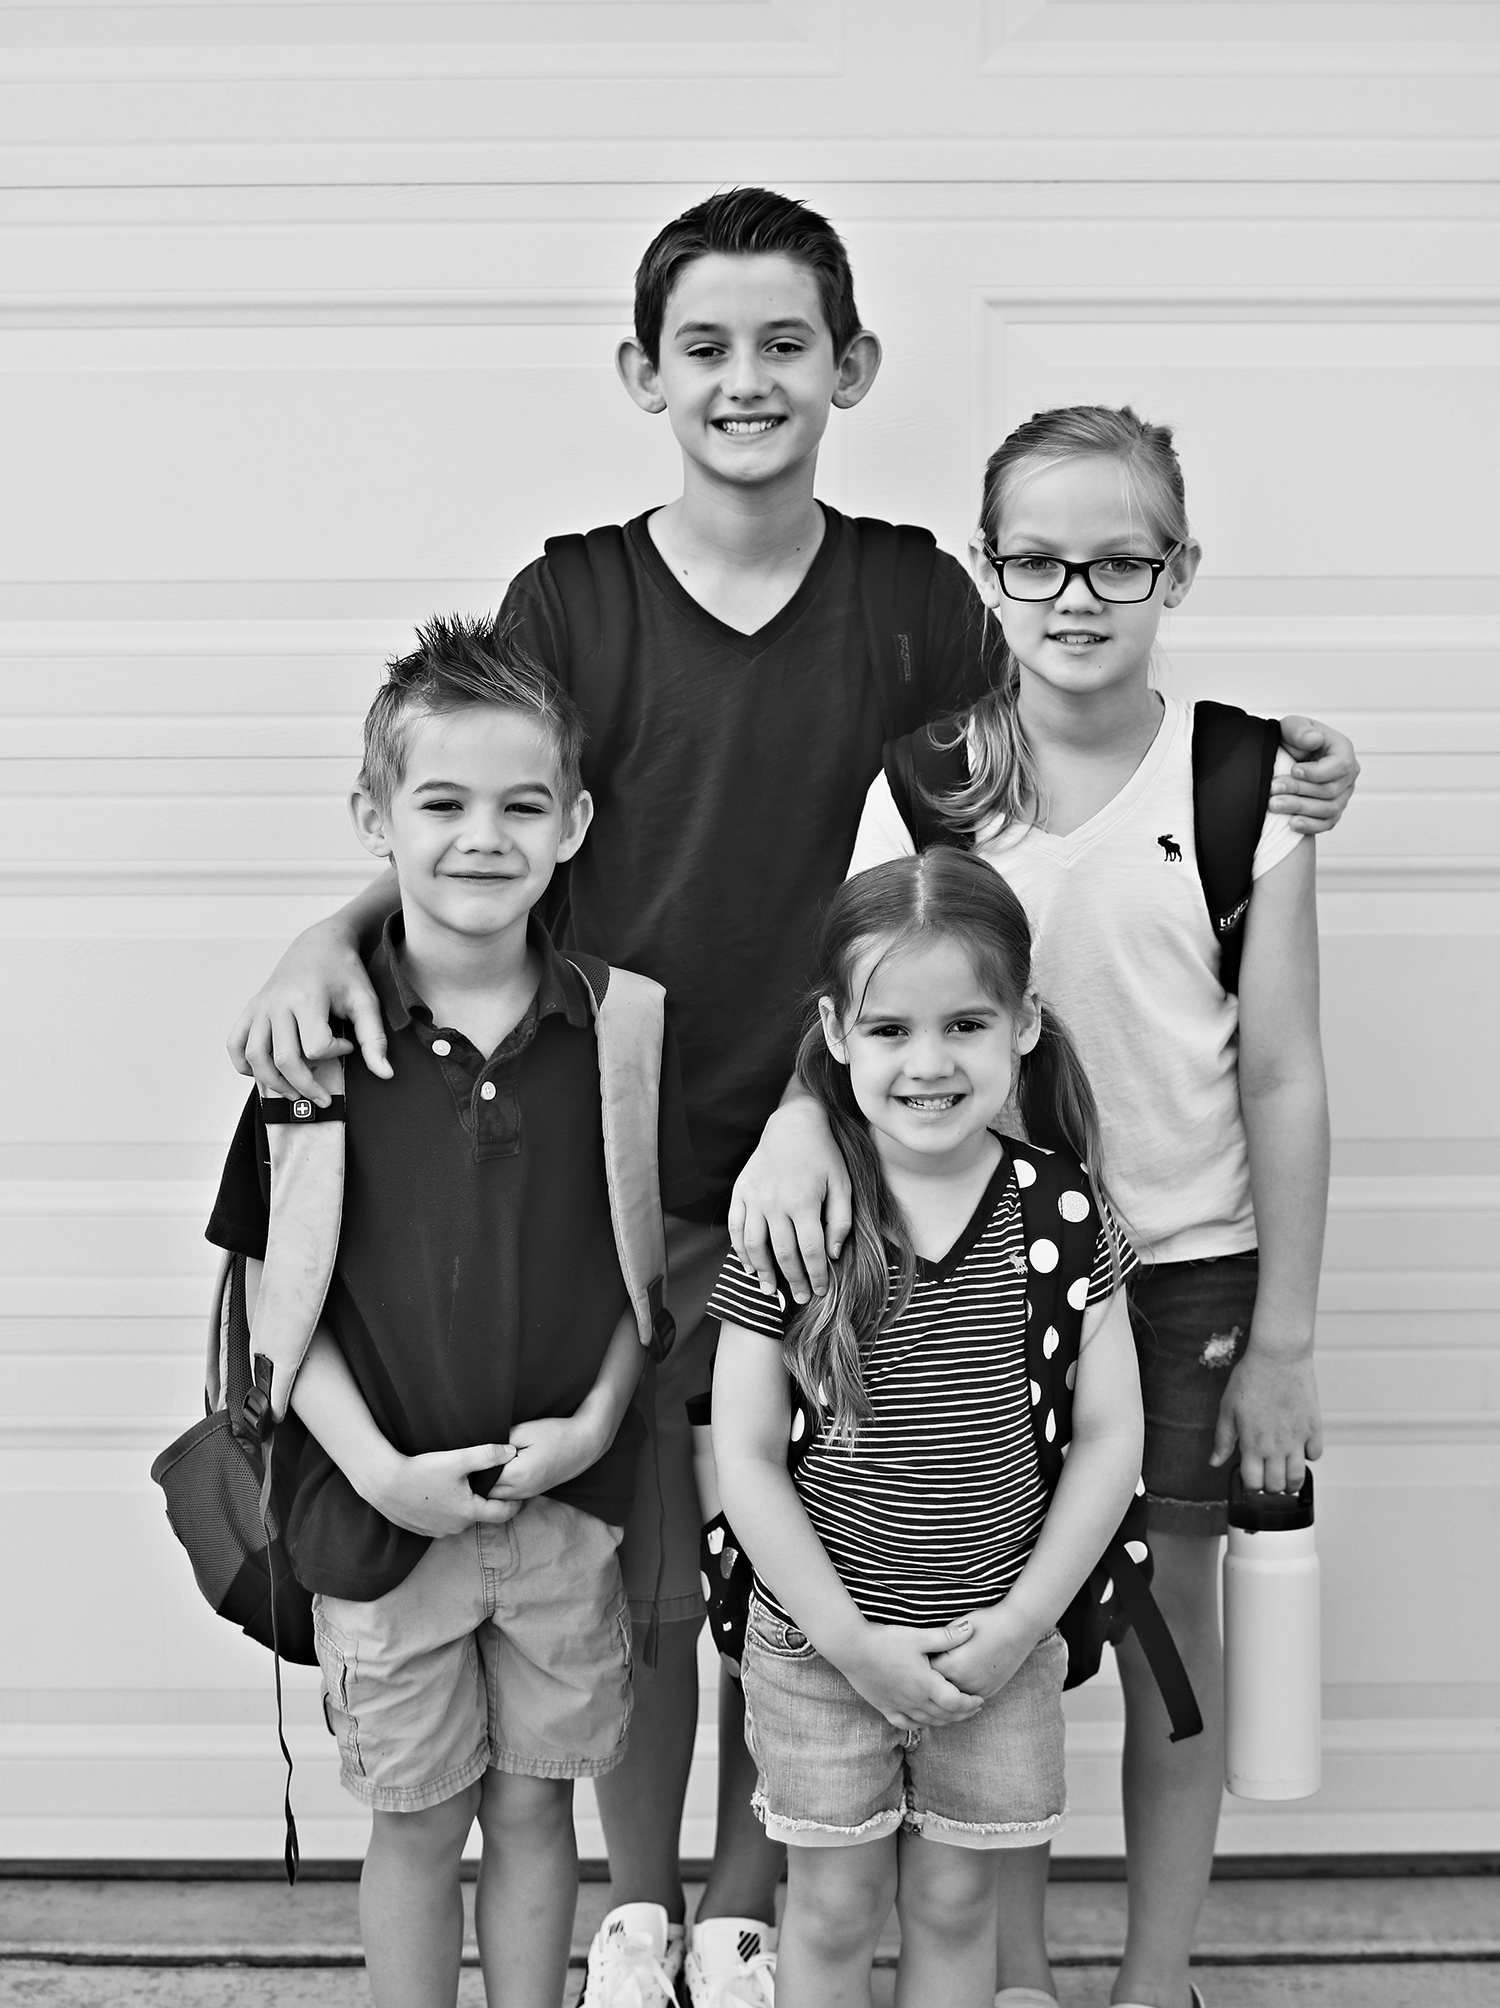 My dearest little ones. A letter to you on another first day of school #Motherhood #RaisingKids #MomBlogger